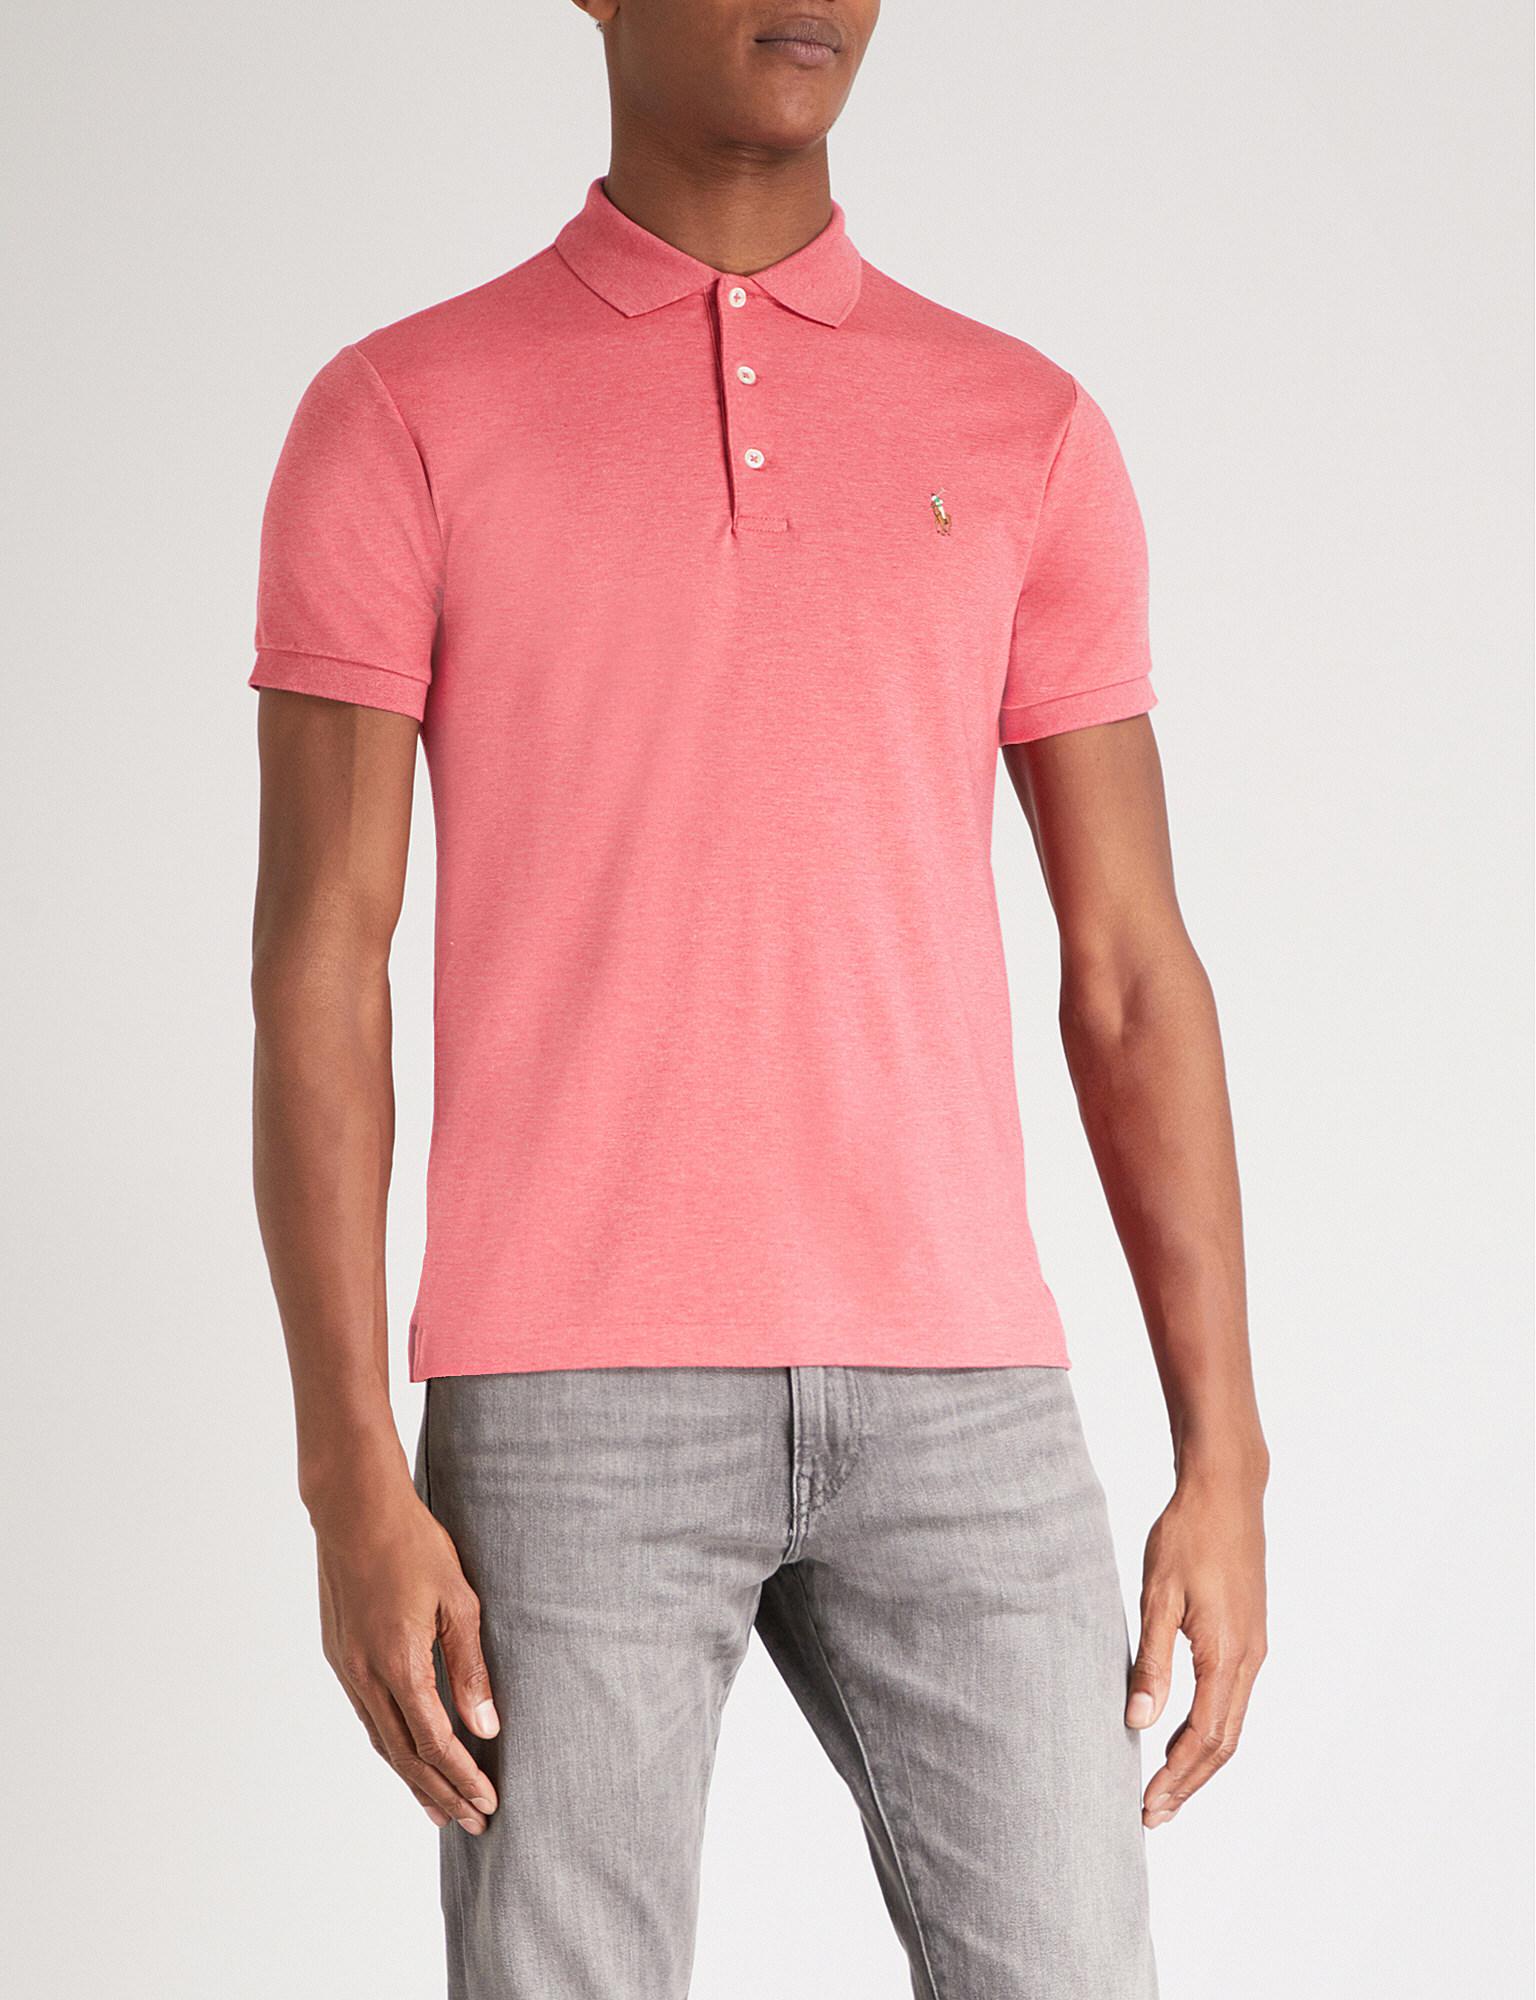 Polo Ralph Lauren Slim-fit Soft-touch Cotton Polo Shirt in Salmon Heather  (Pink) for Men - Lyst